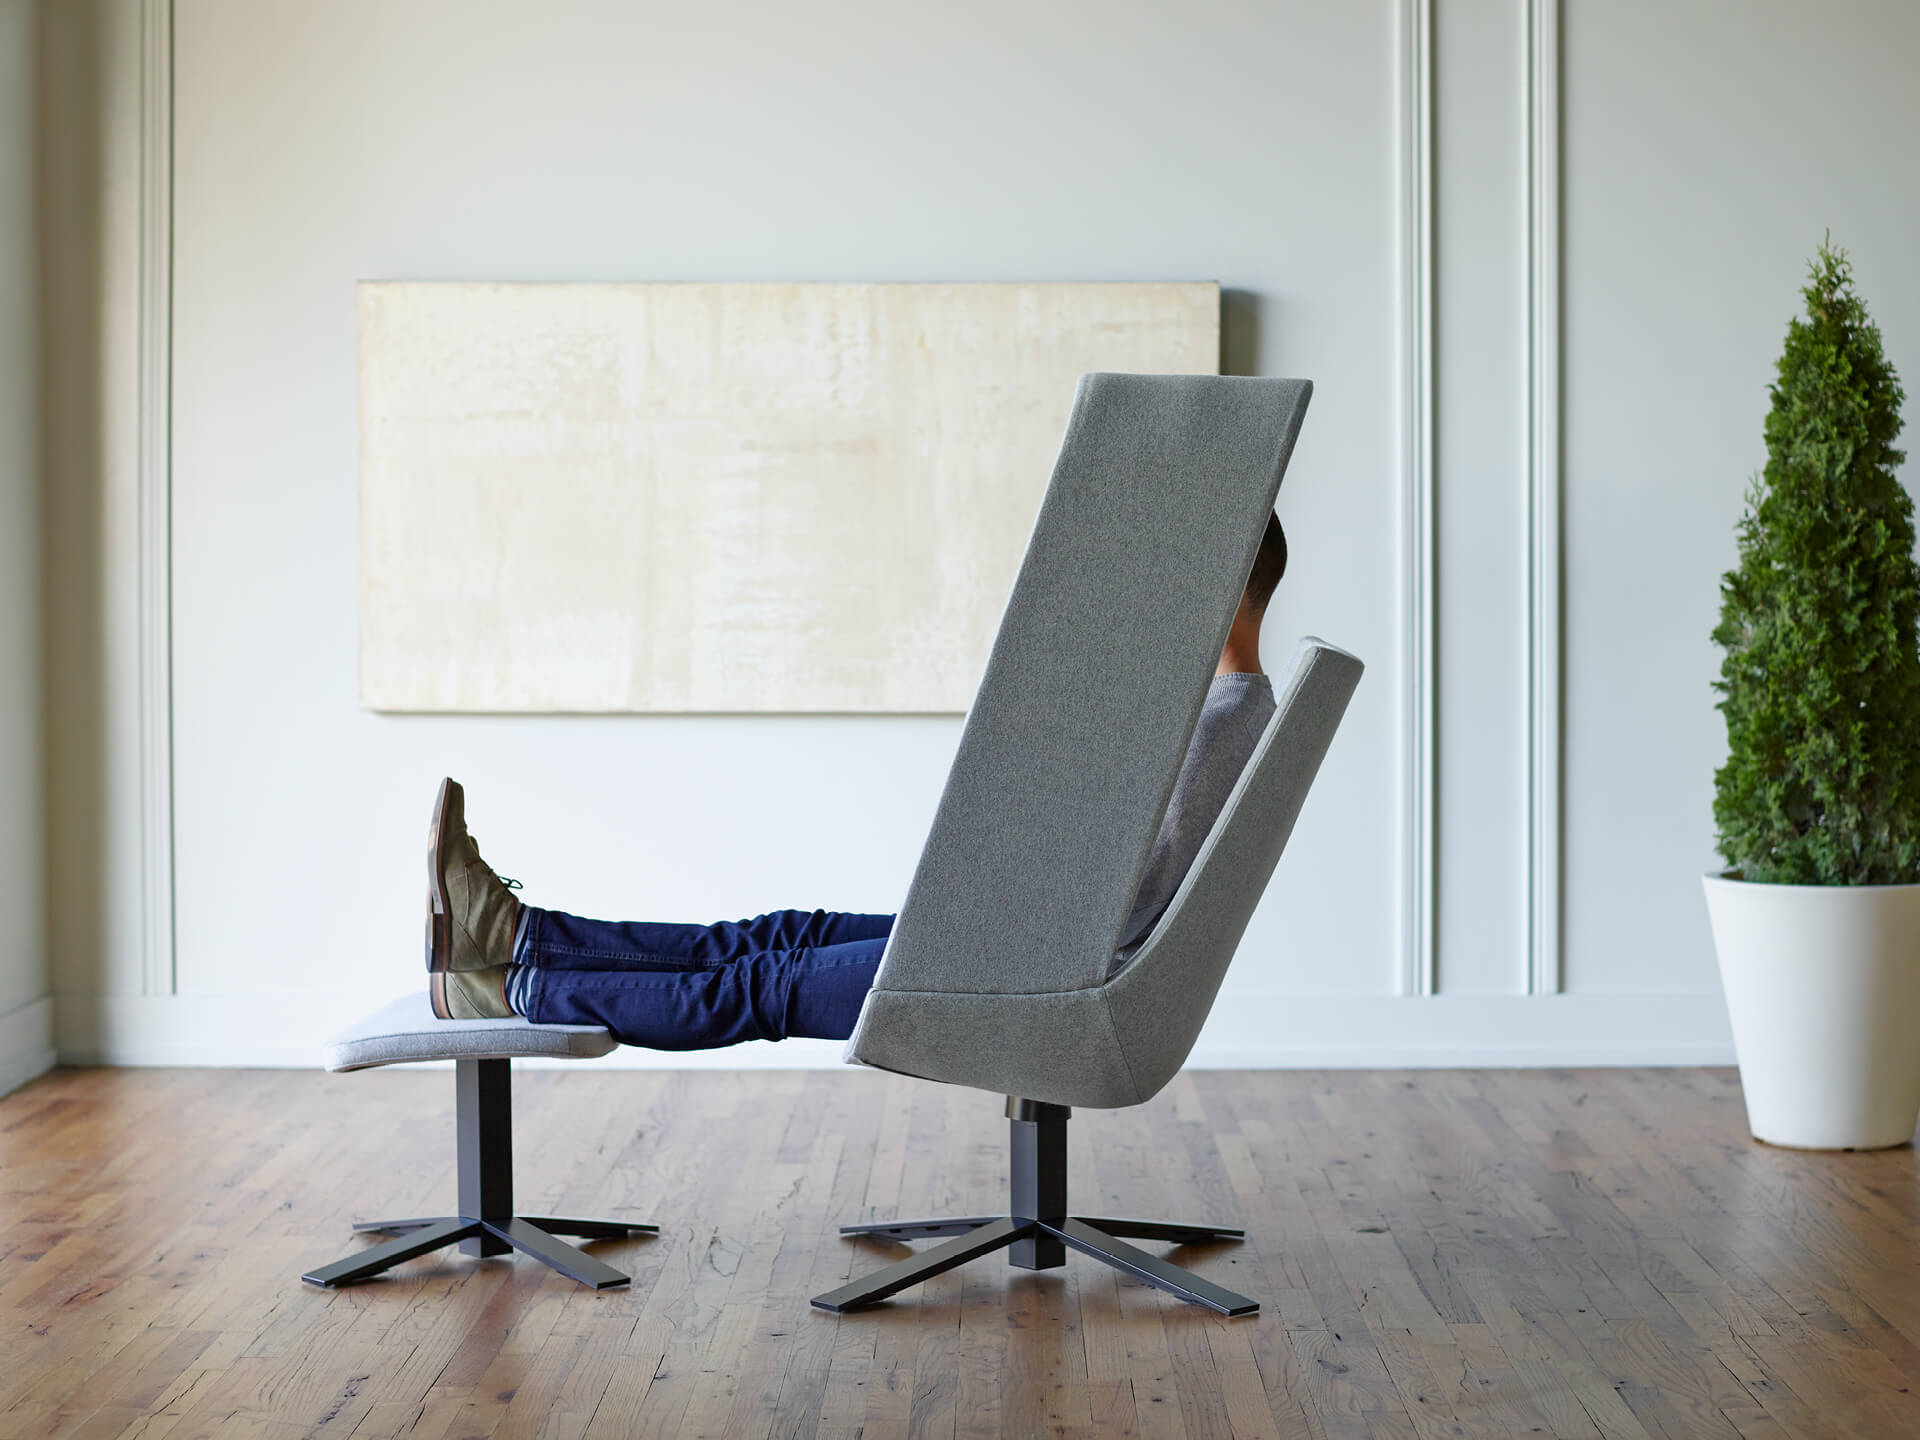 Haworth Mike Maaike Designer grey chair in office with someone sitting in it